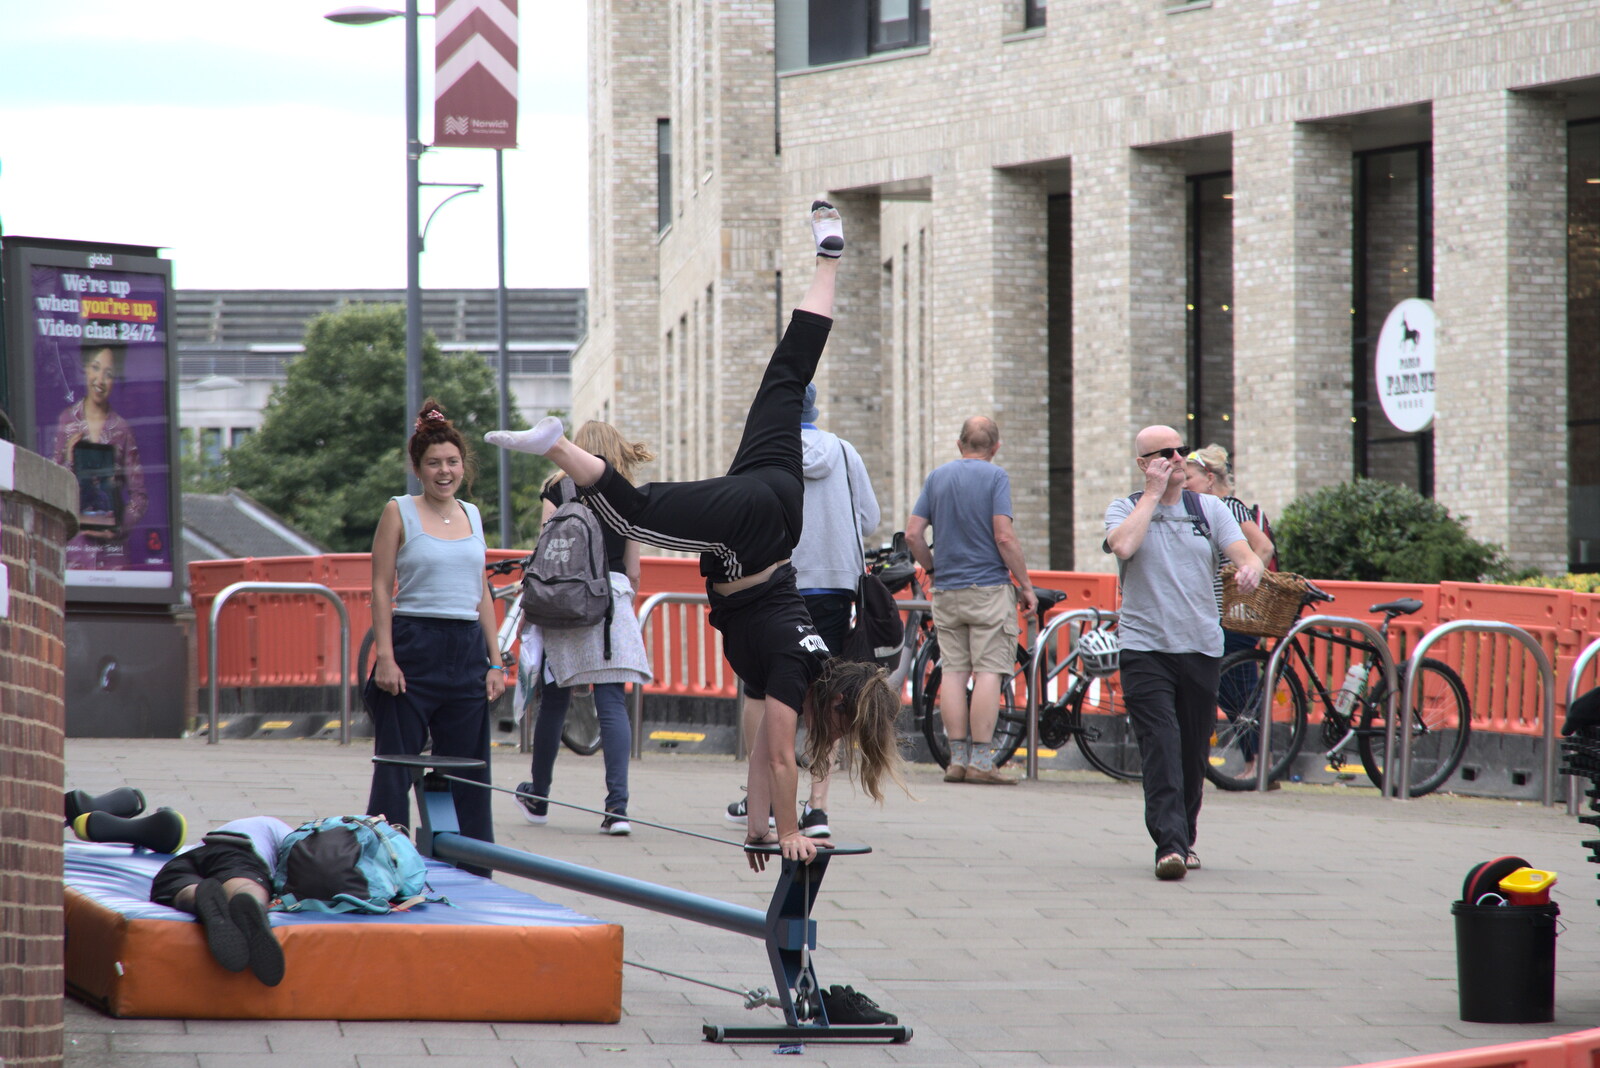 Some circus skills occur from The Lord Mayor's Procession, Norwich, Norfolk - 2nd July 2022